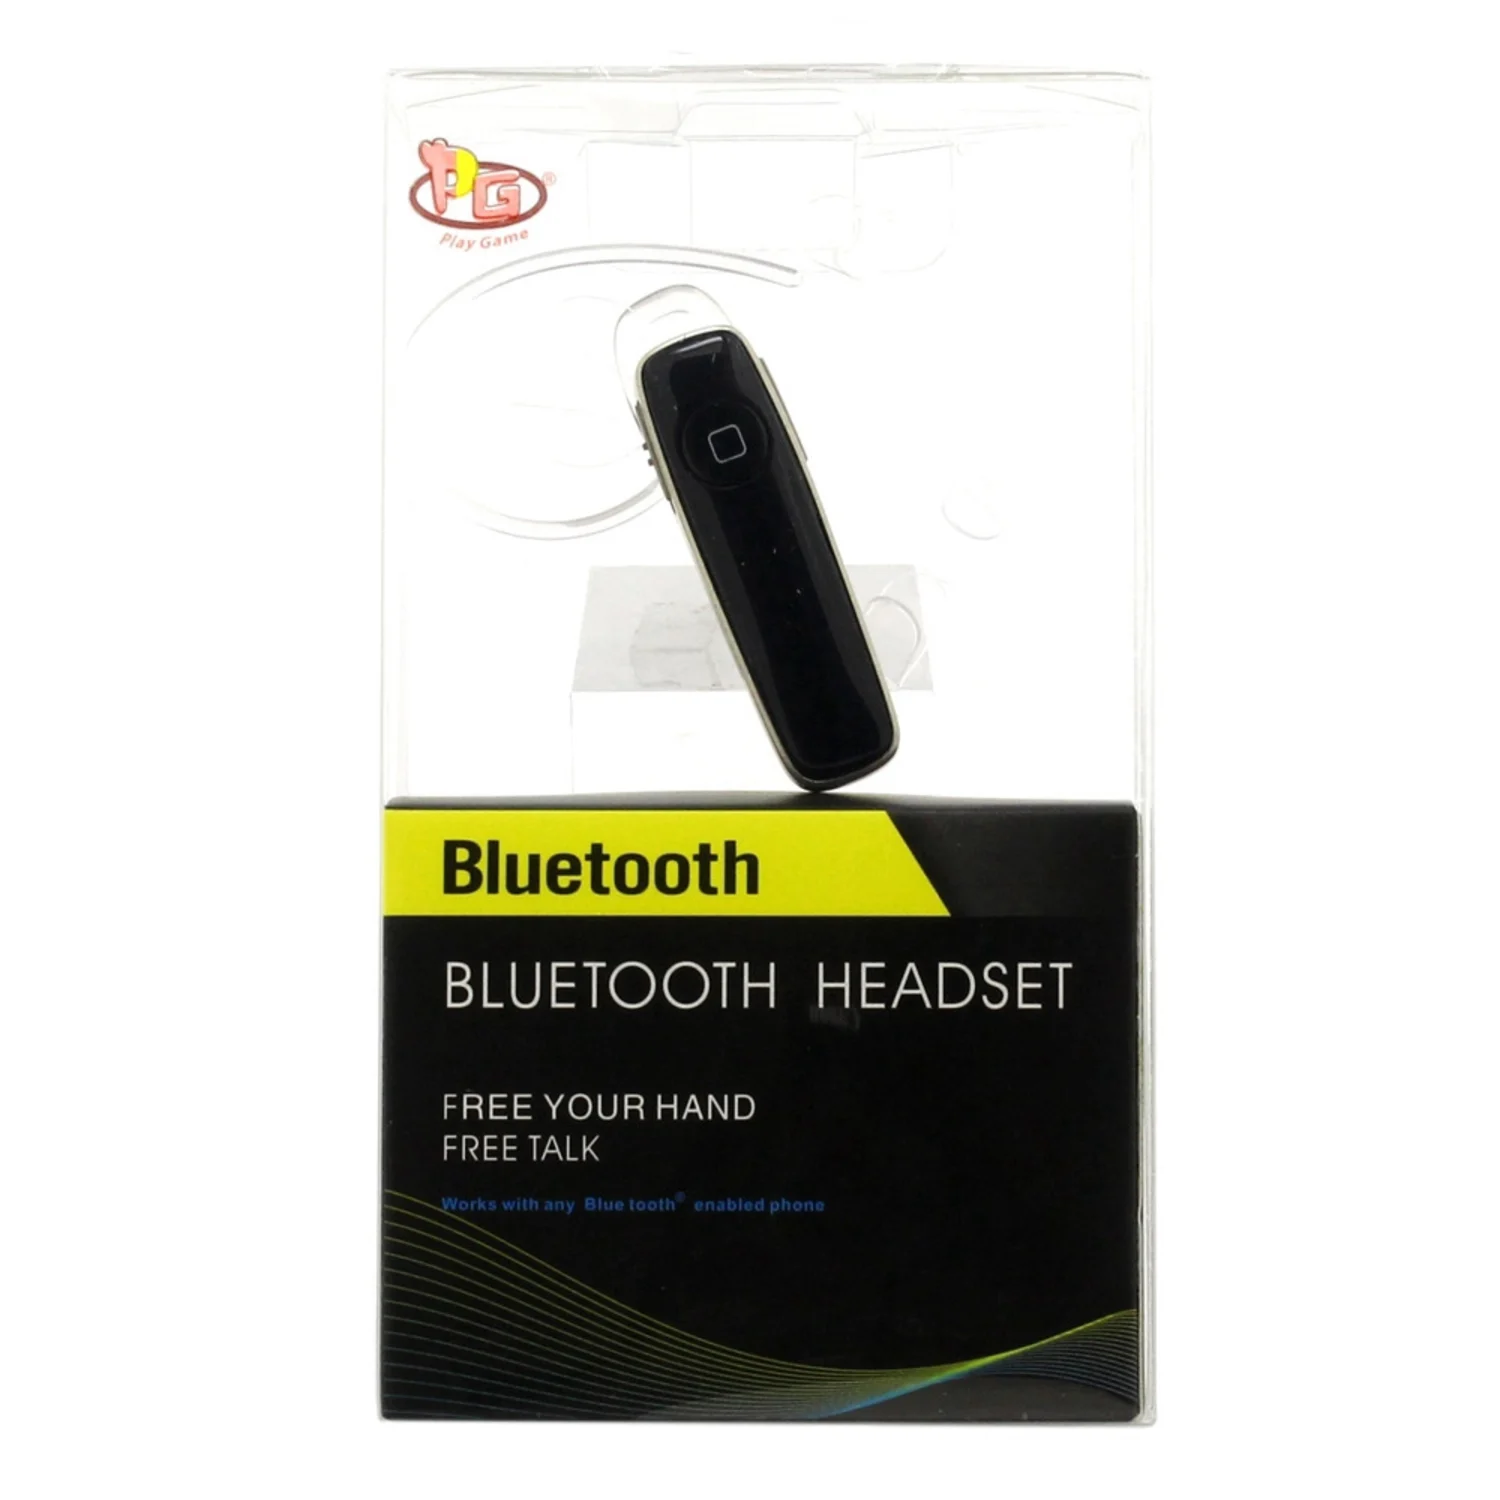 Headset Play Game Bluetooth para PS3